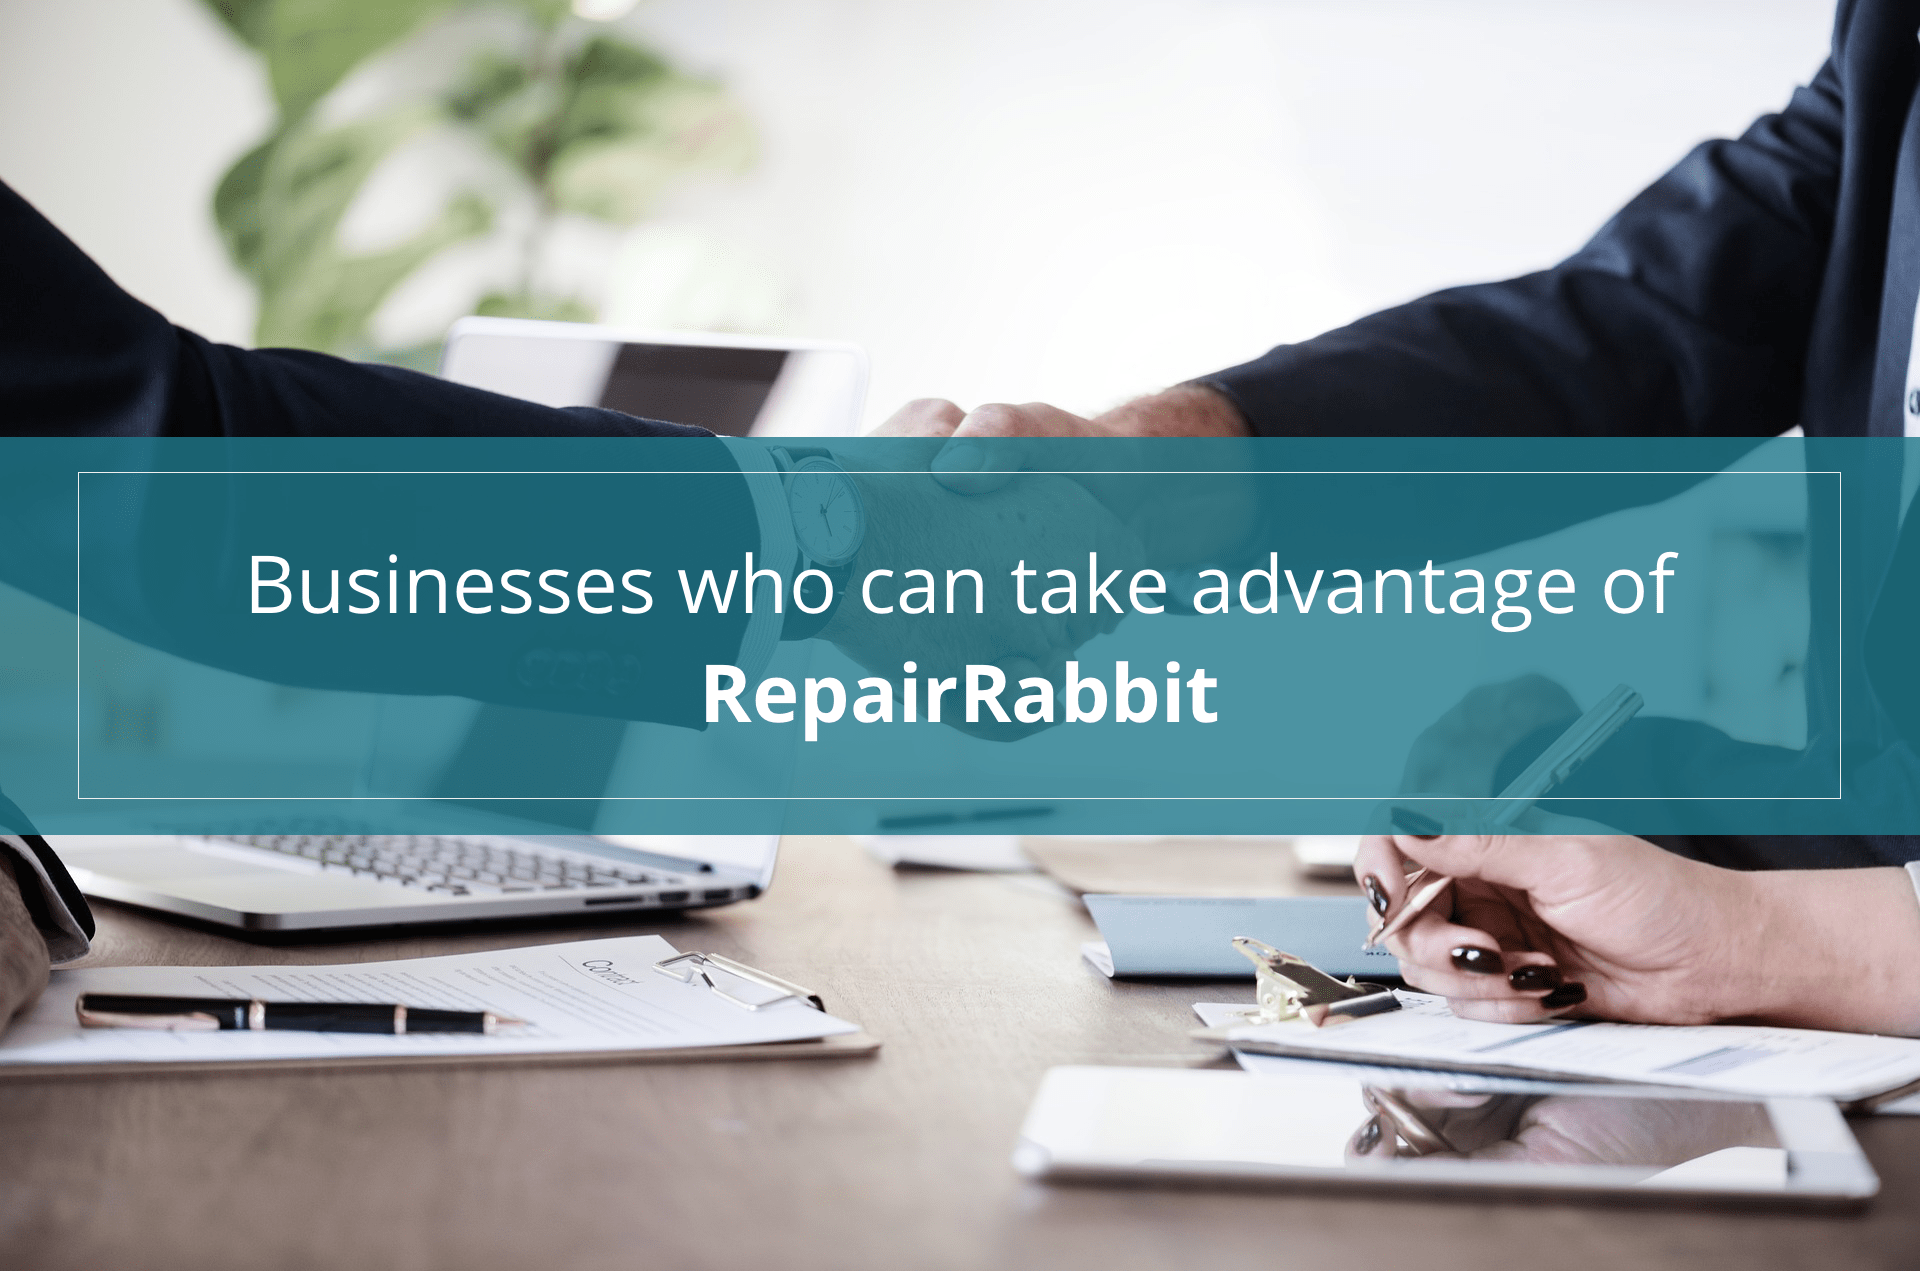 Businesses who can take advantage of RepairRabbit software